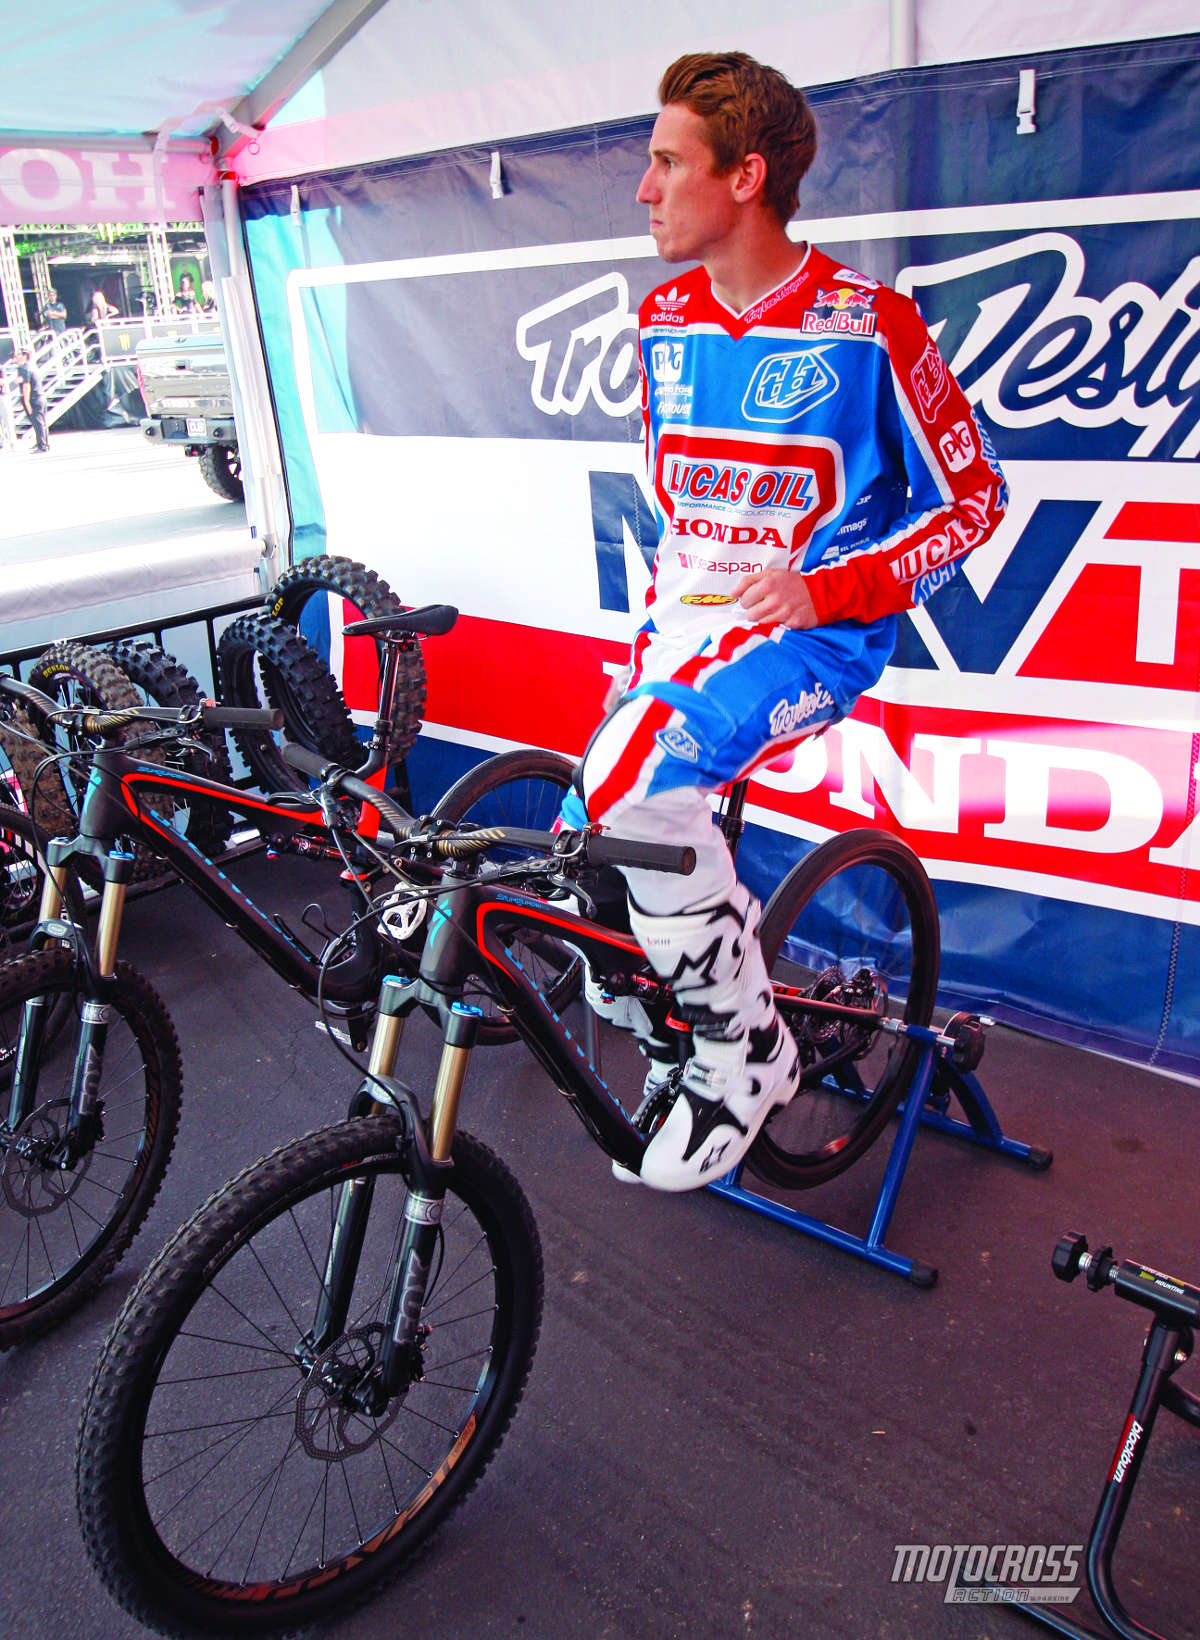 The Bamboo Body - Blog - Riders training: muscle shortening in motocross